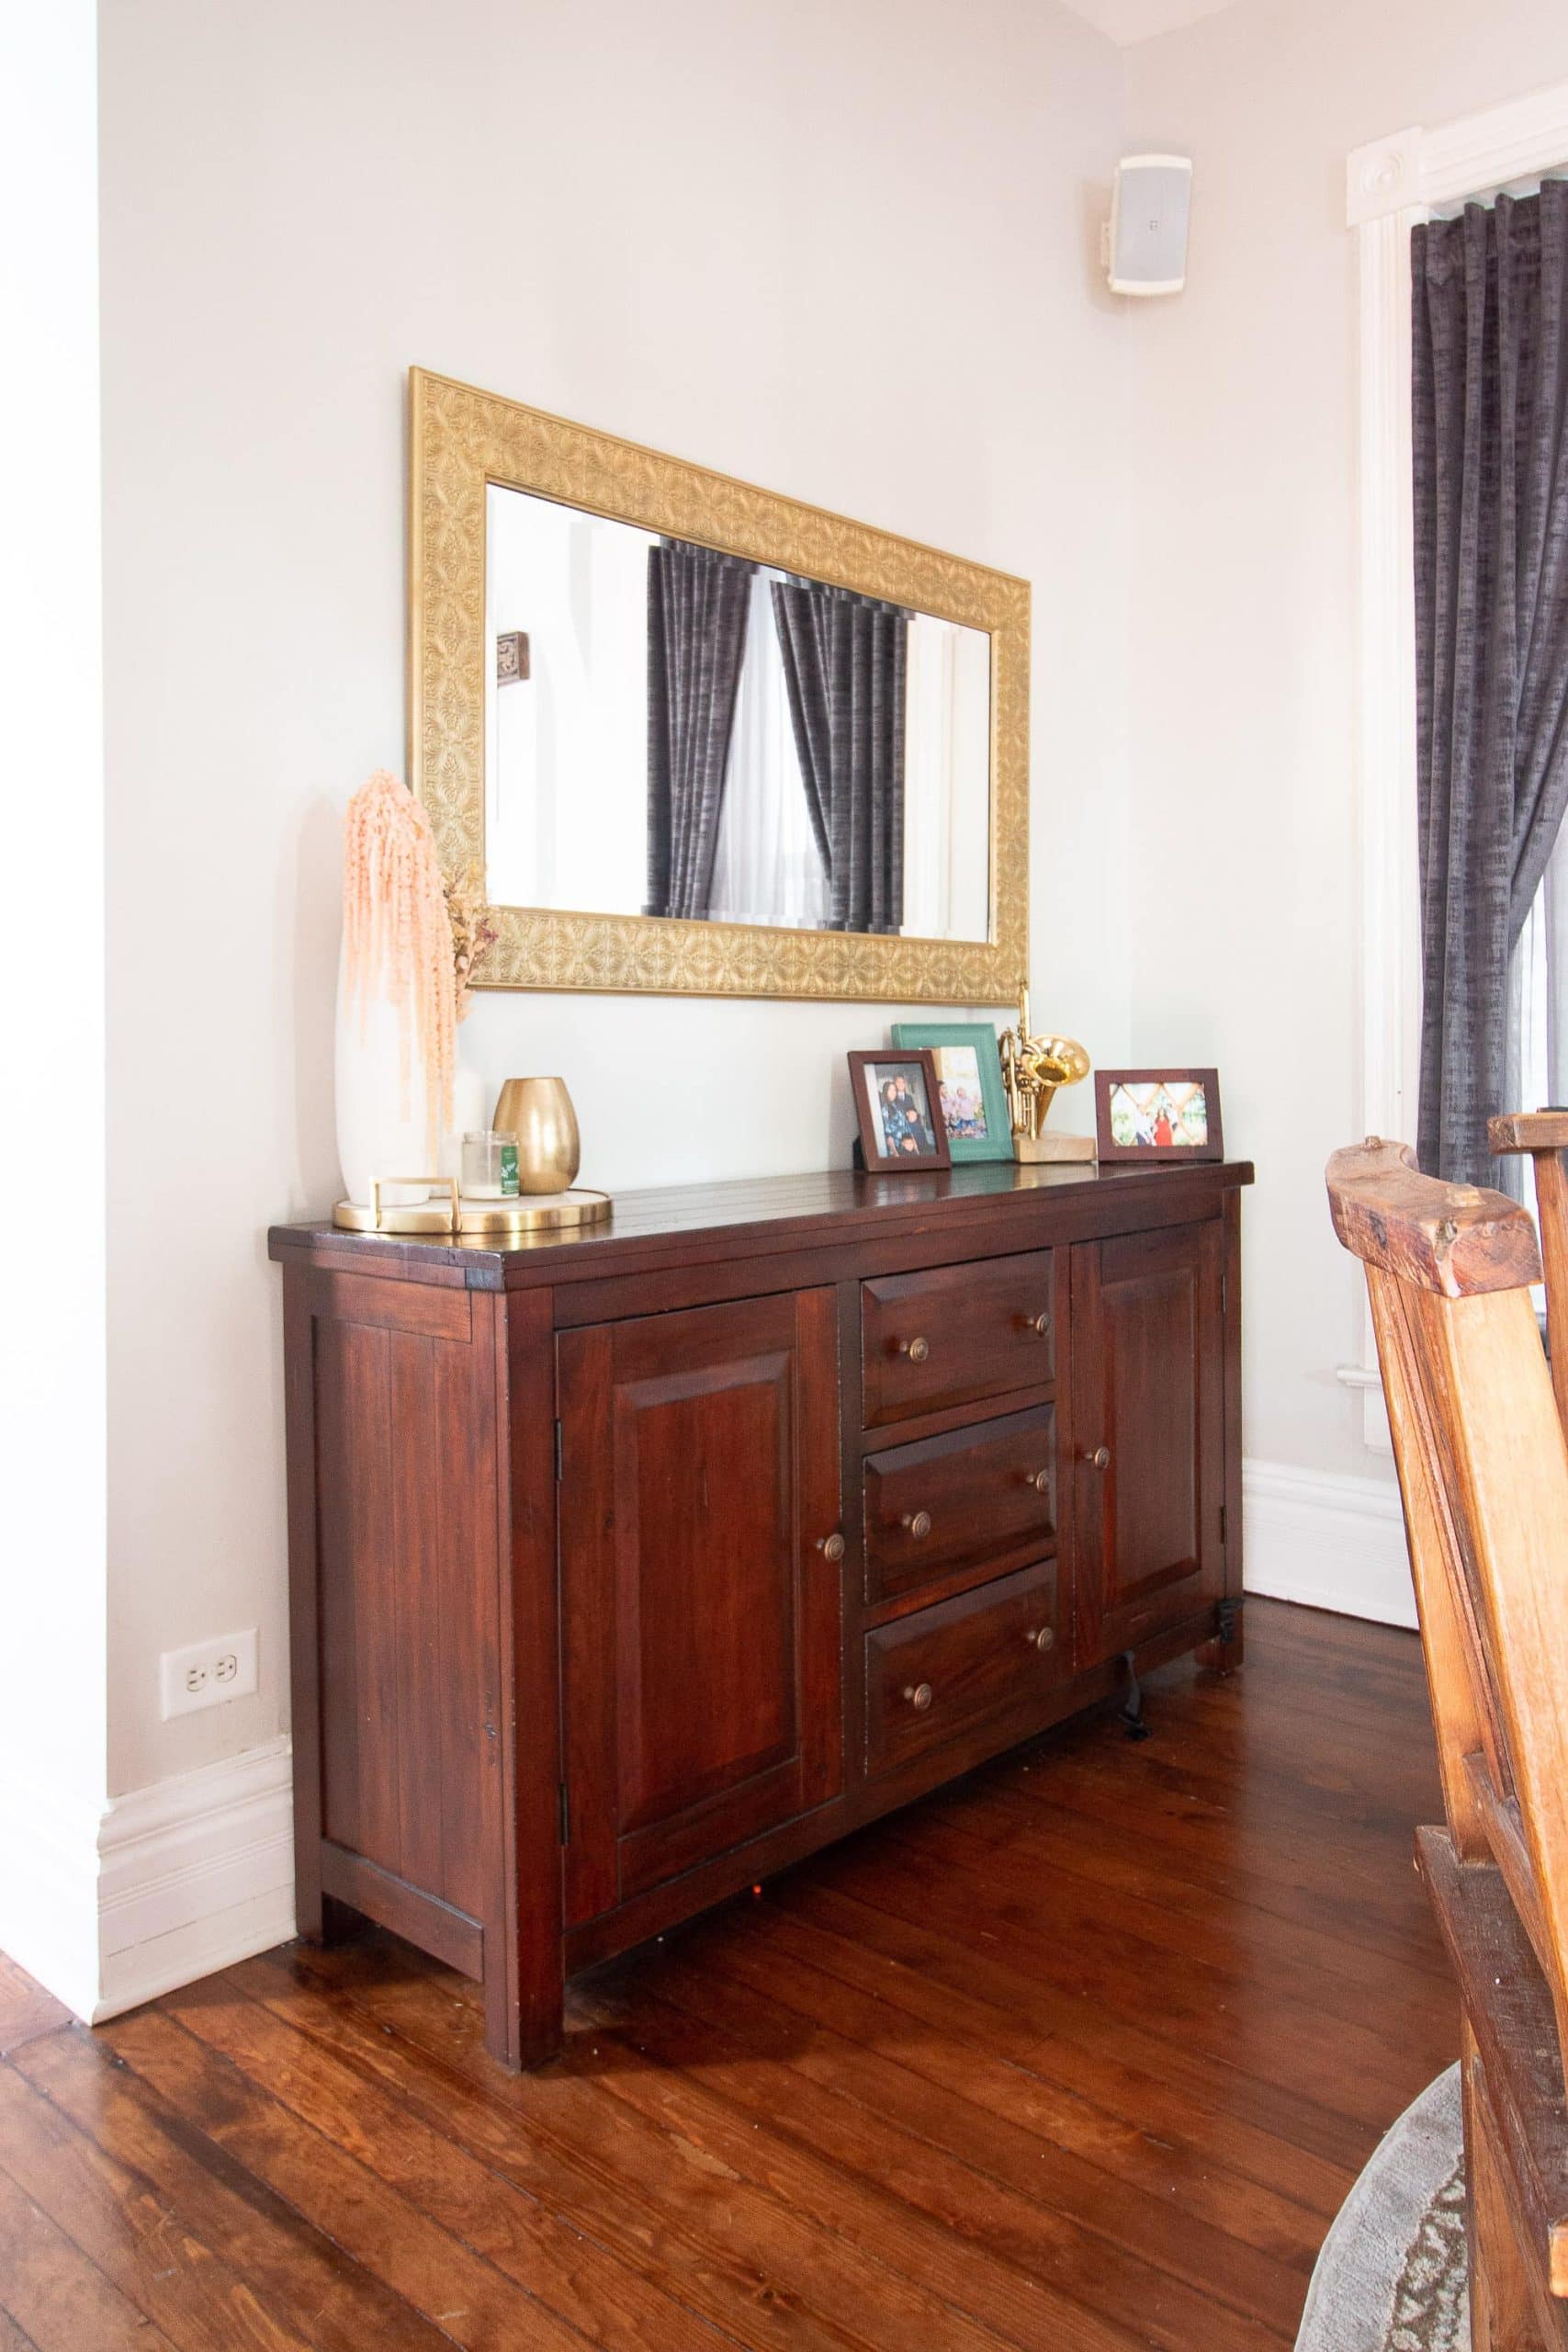 Wood sideboard with brass mirror above